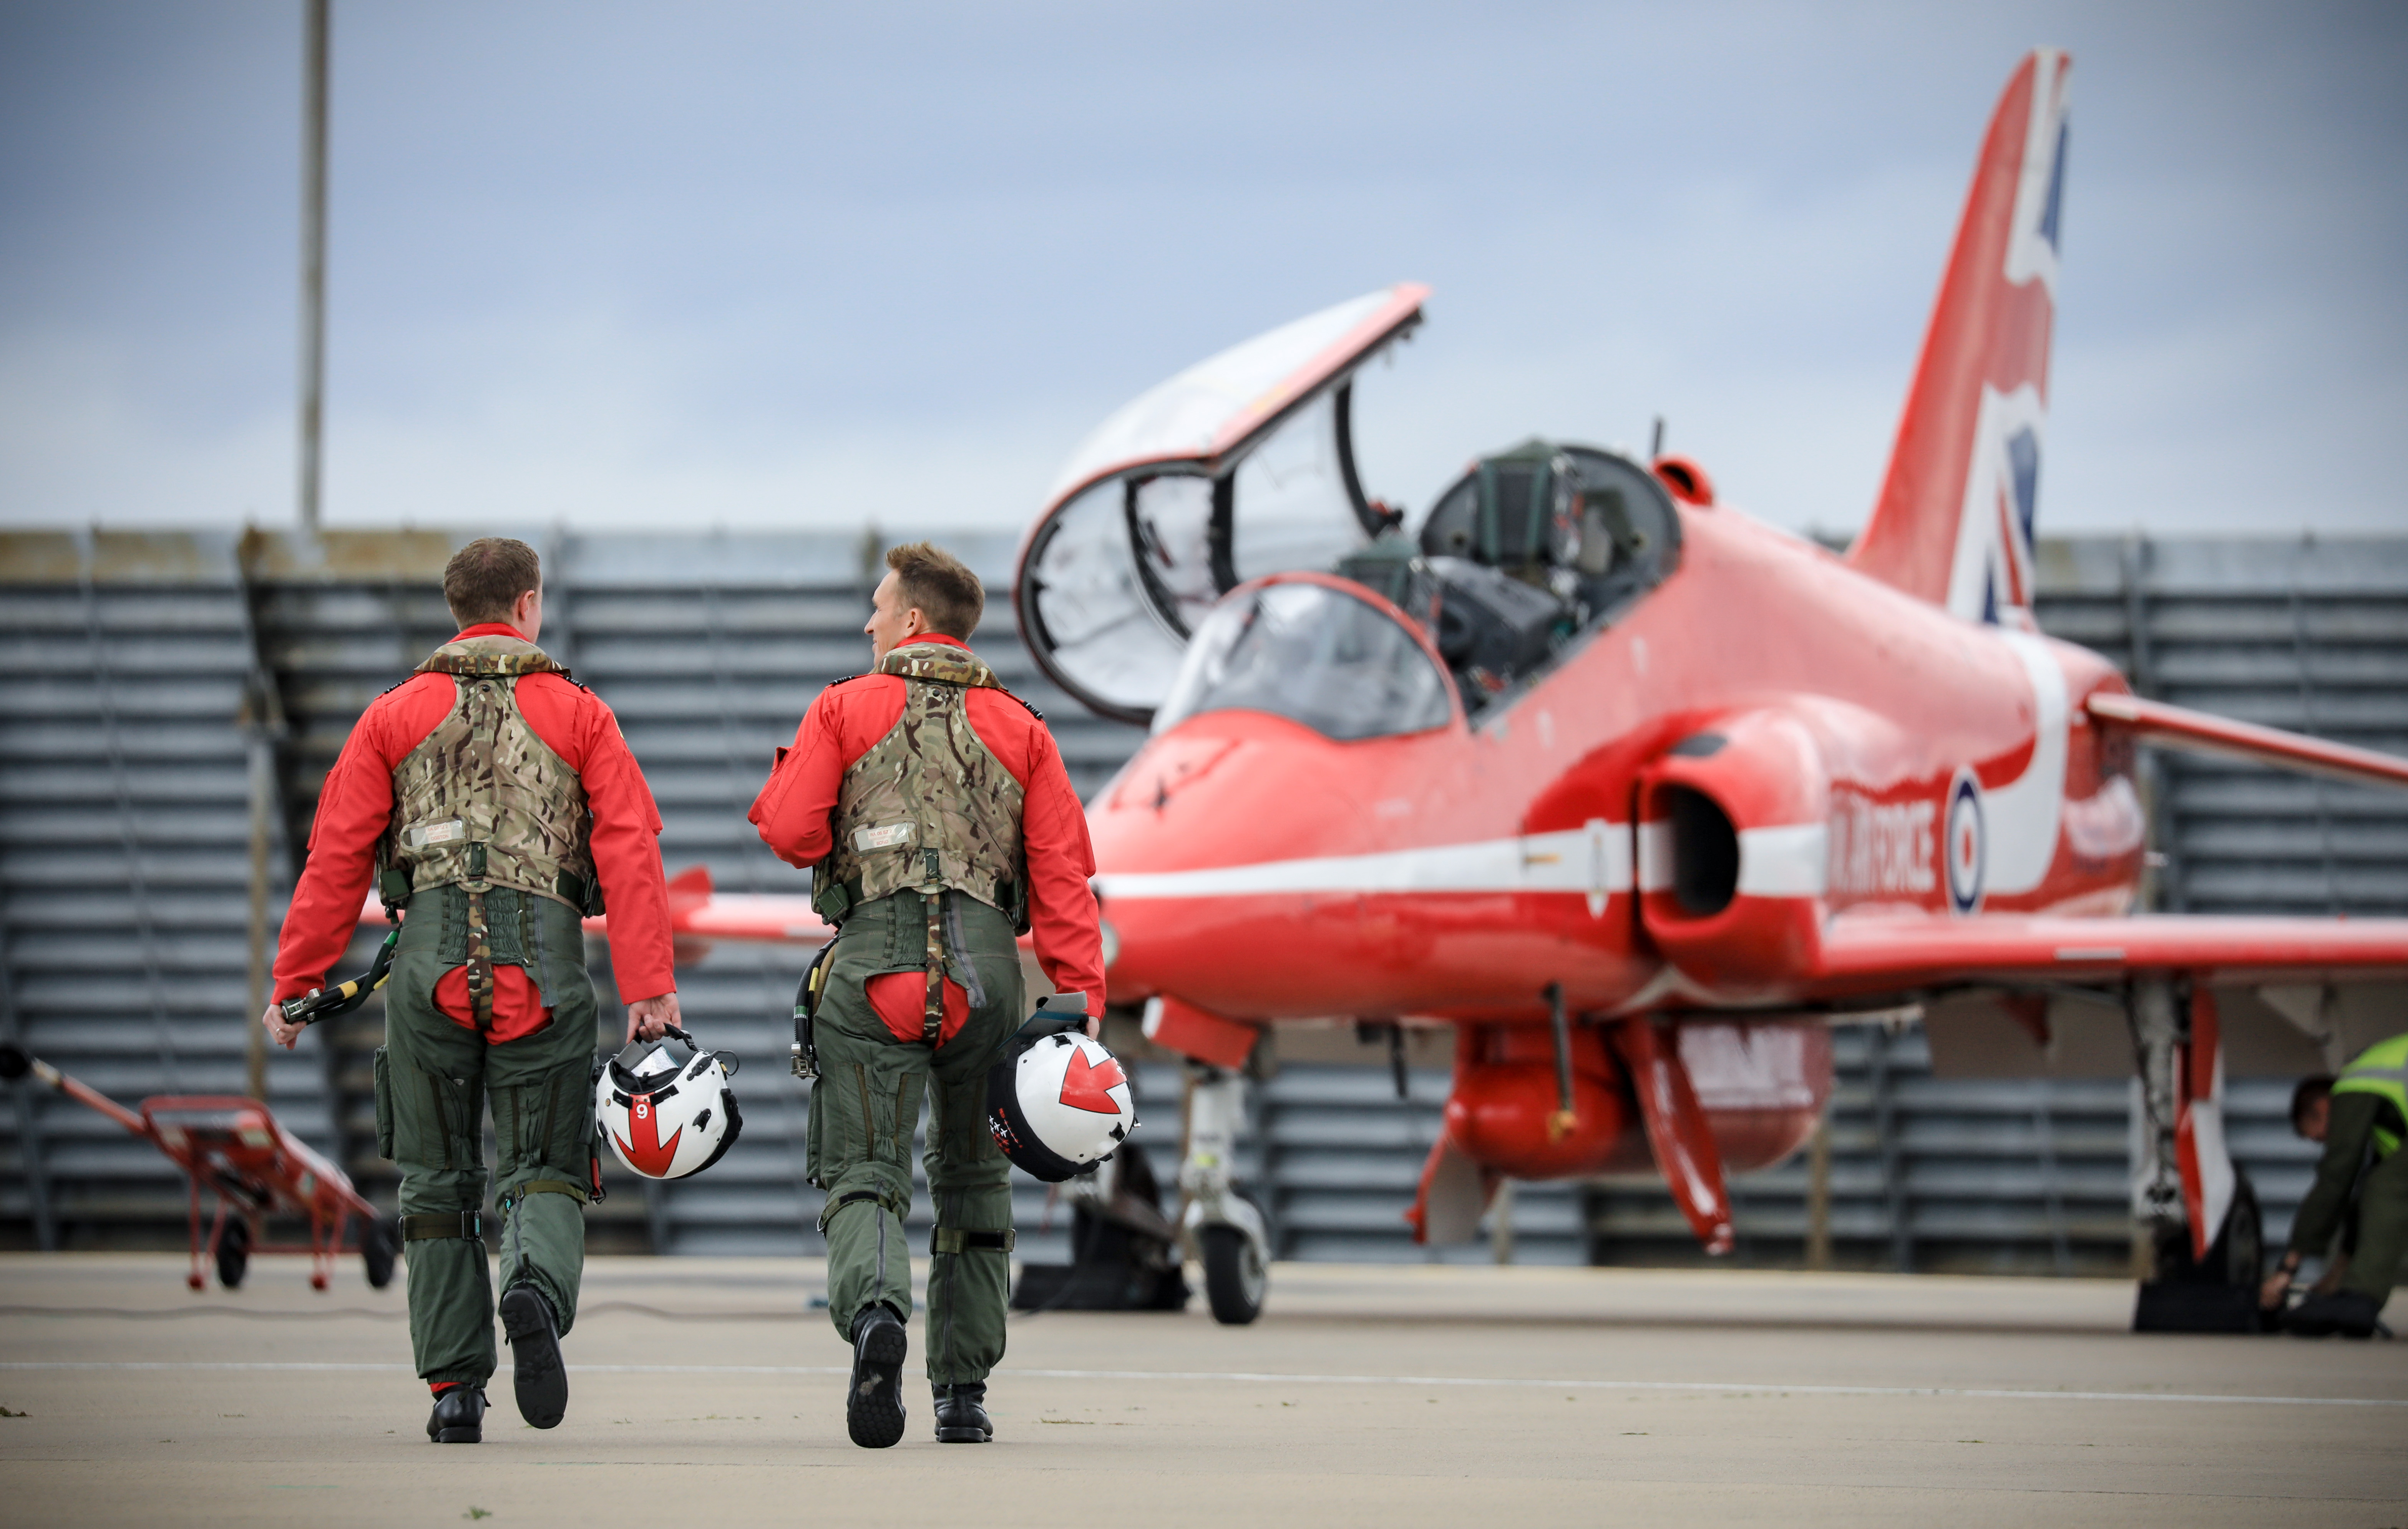 The relocation to RAF Waddington maintains the Red Arrows' bond with Lincolnshire.